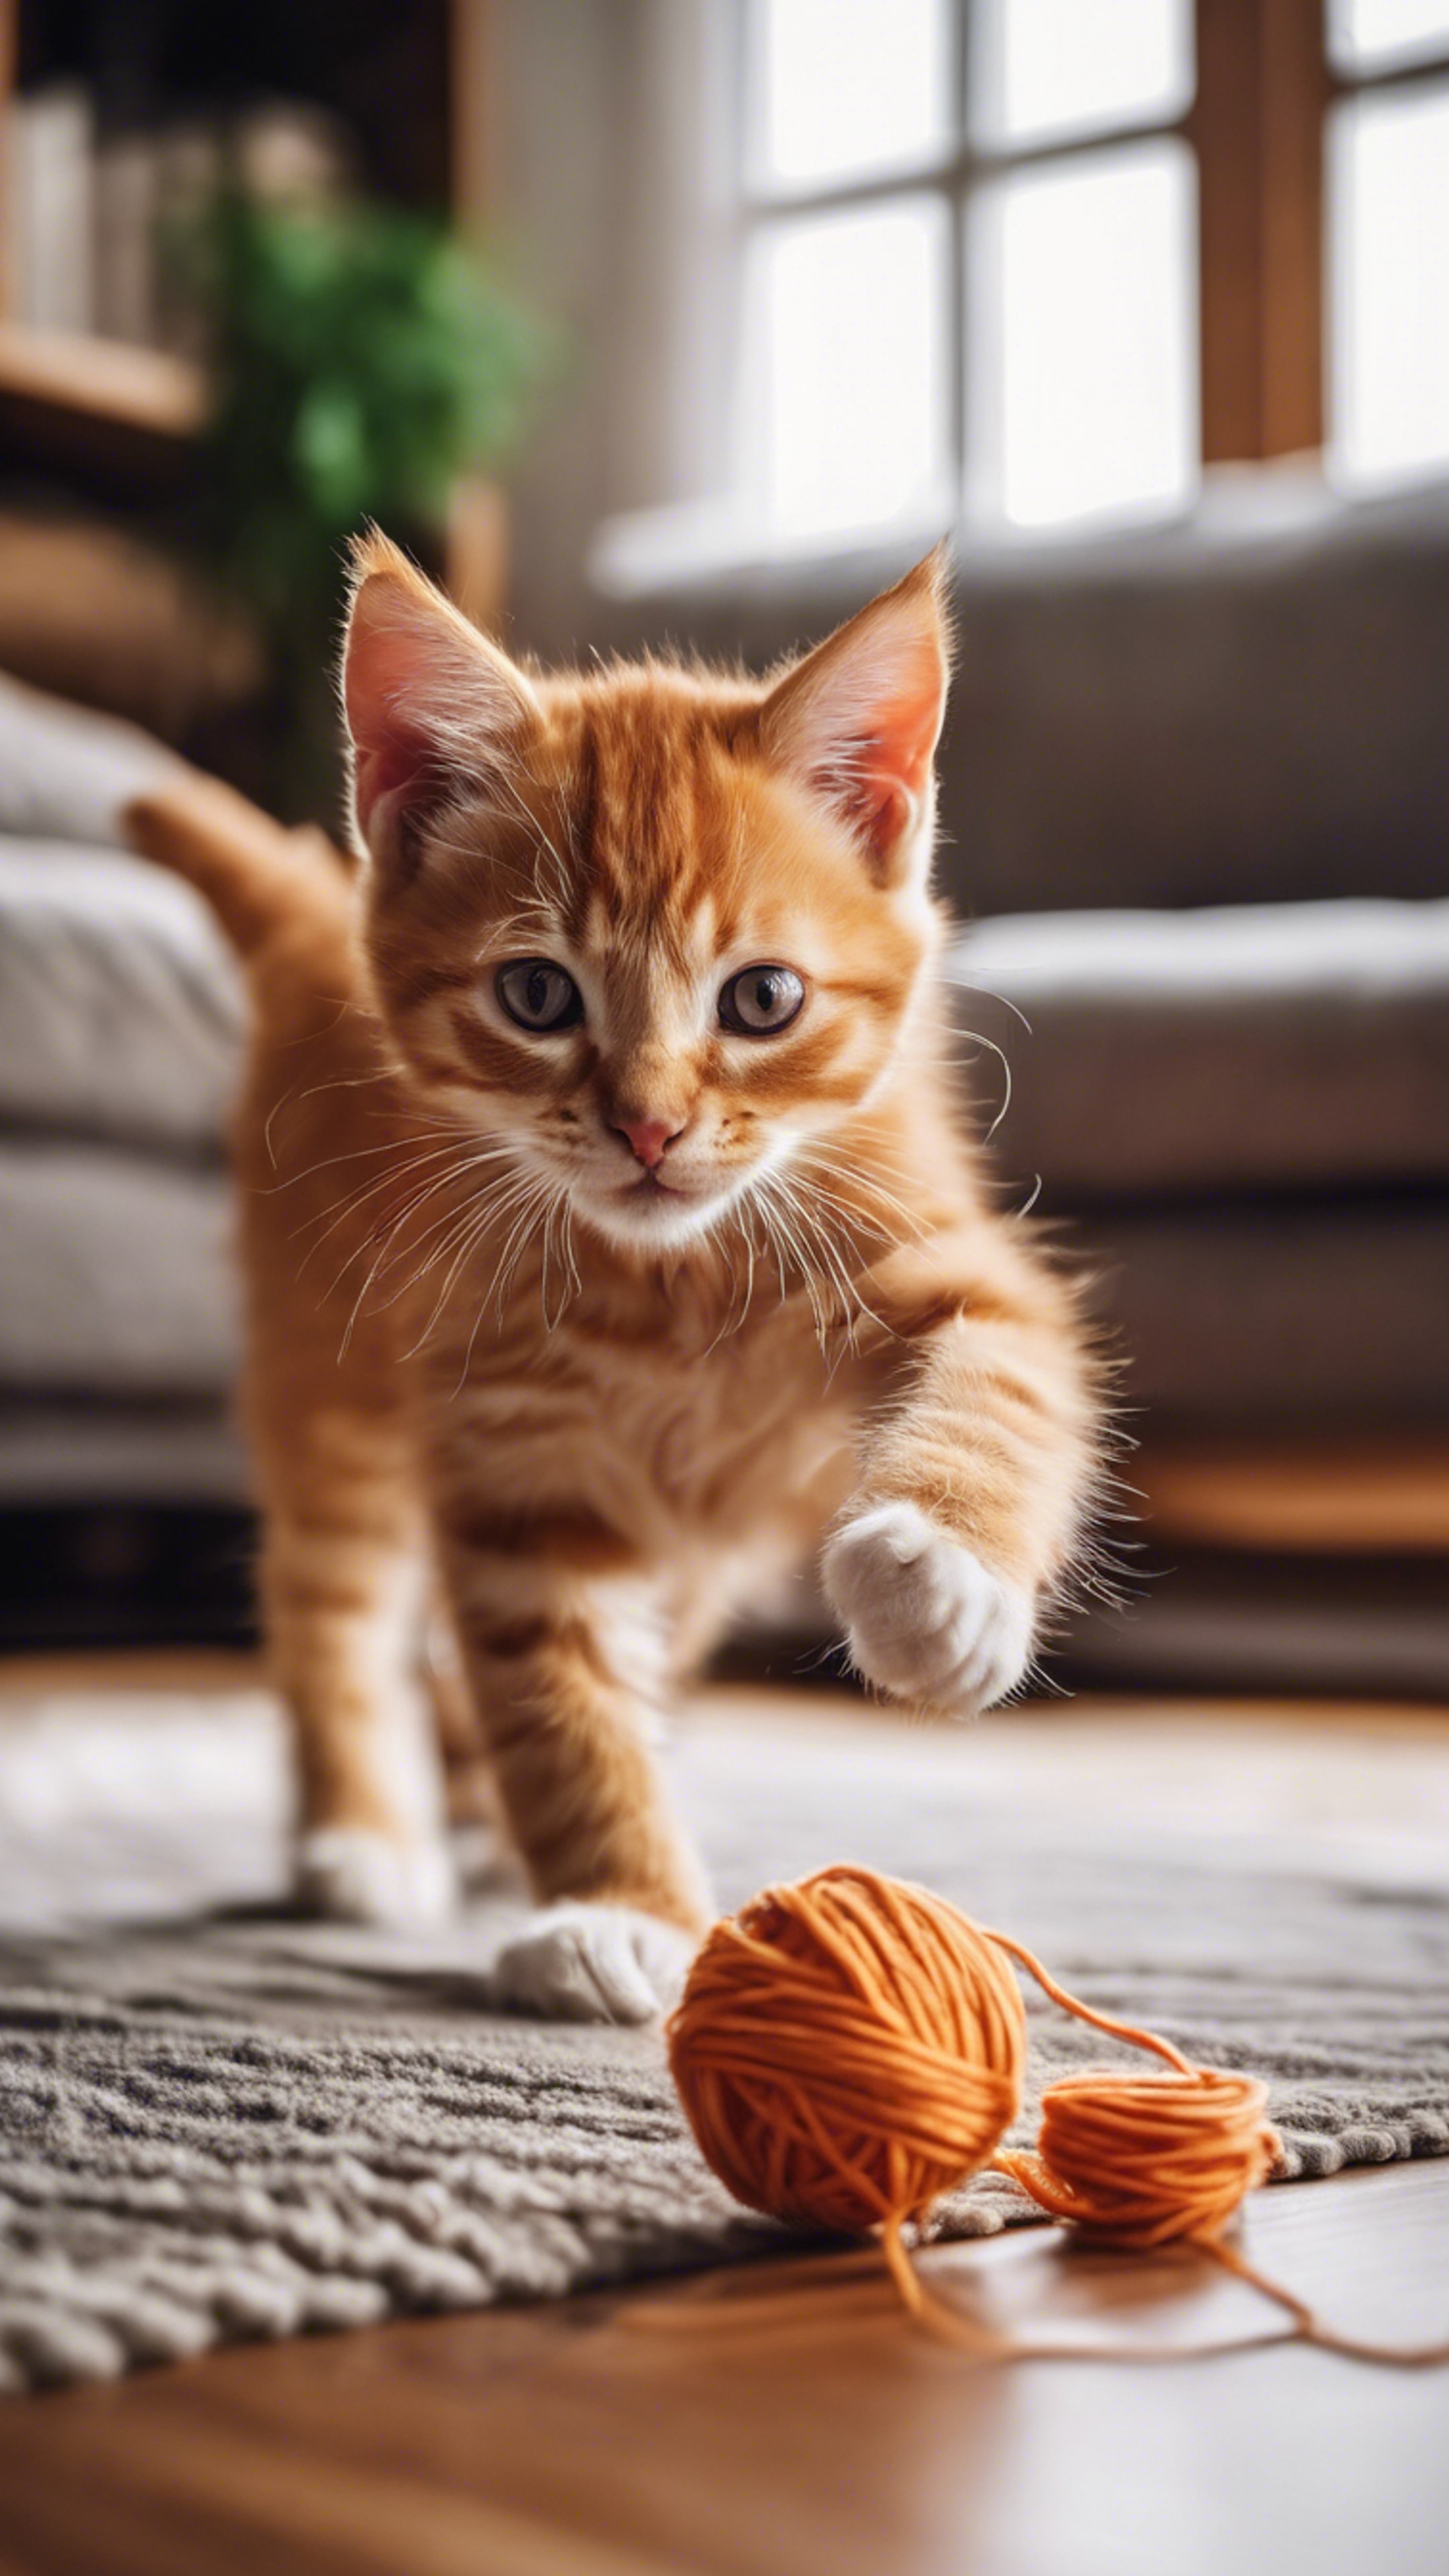 A playful orange tabby kitten, chasing a ball of yarn in a cozy wooden living room. Tapetai[48ba56b3f1554d3caaed]